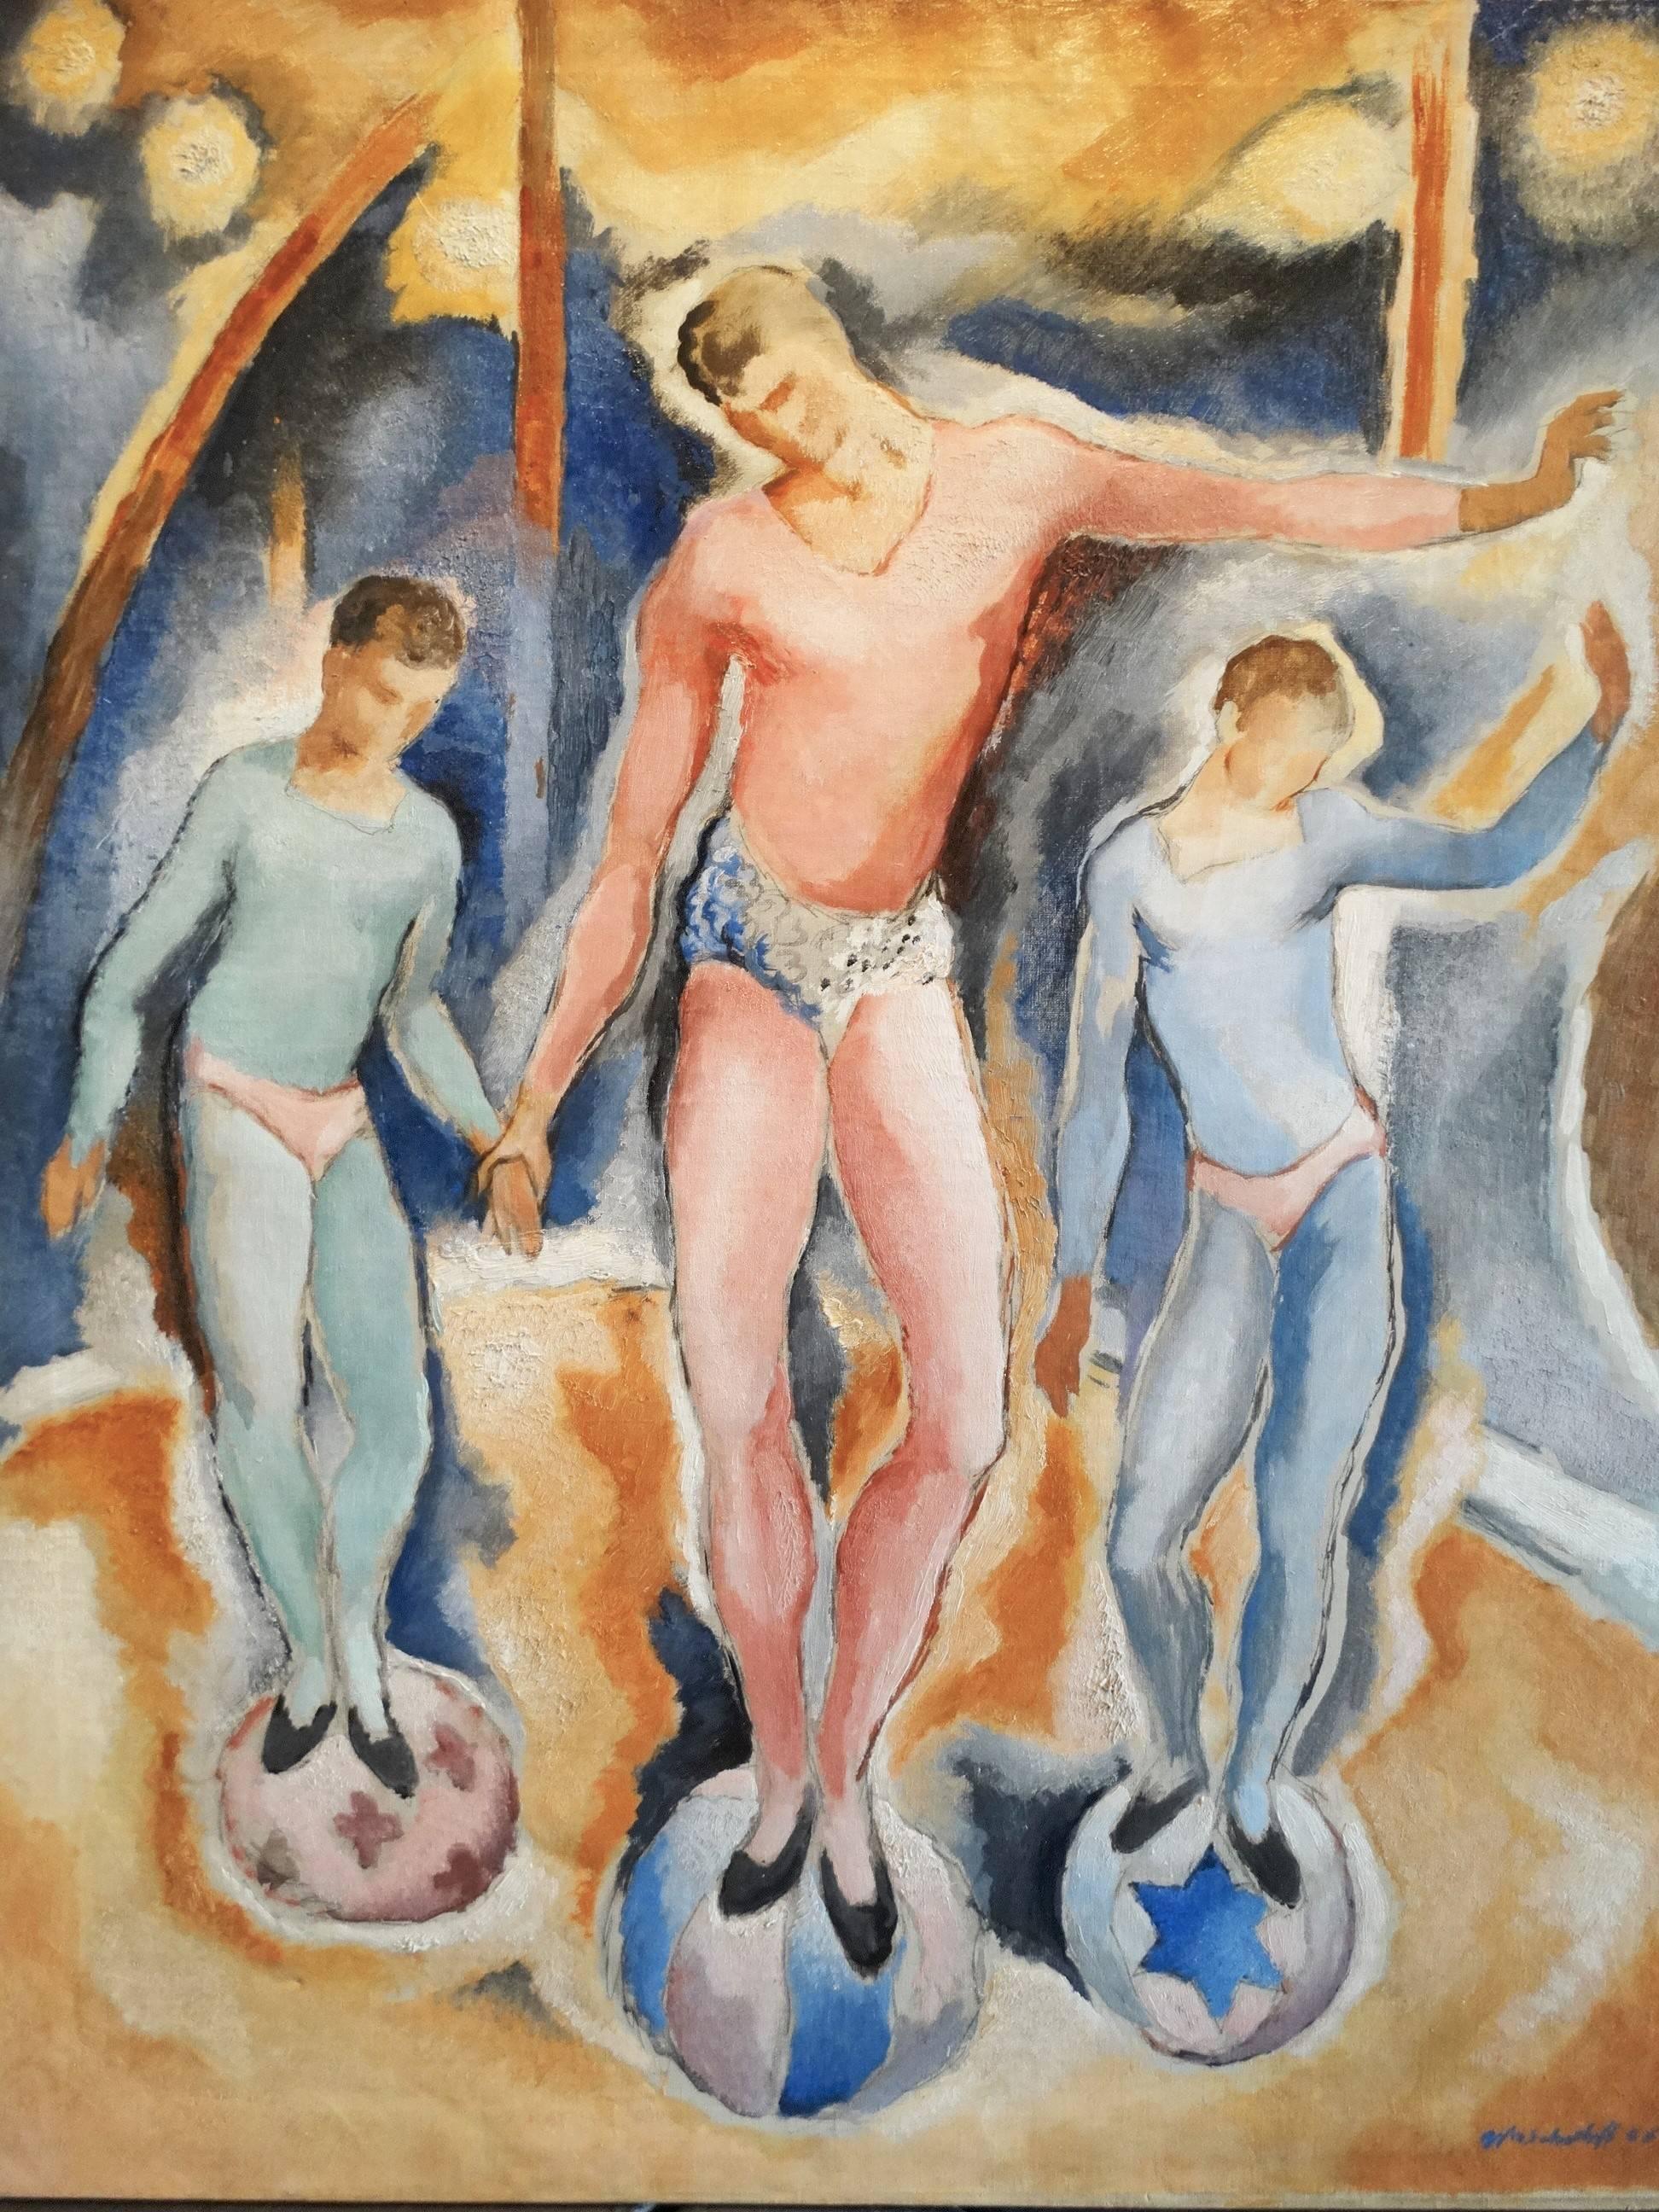 William Schulhoff Figurative Painting - "Circus Performers"